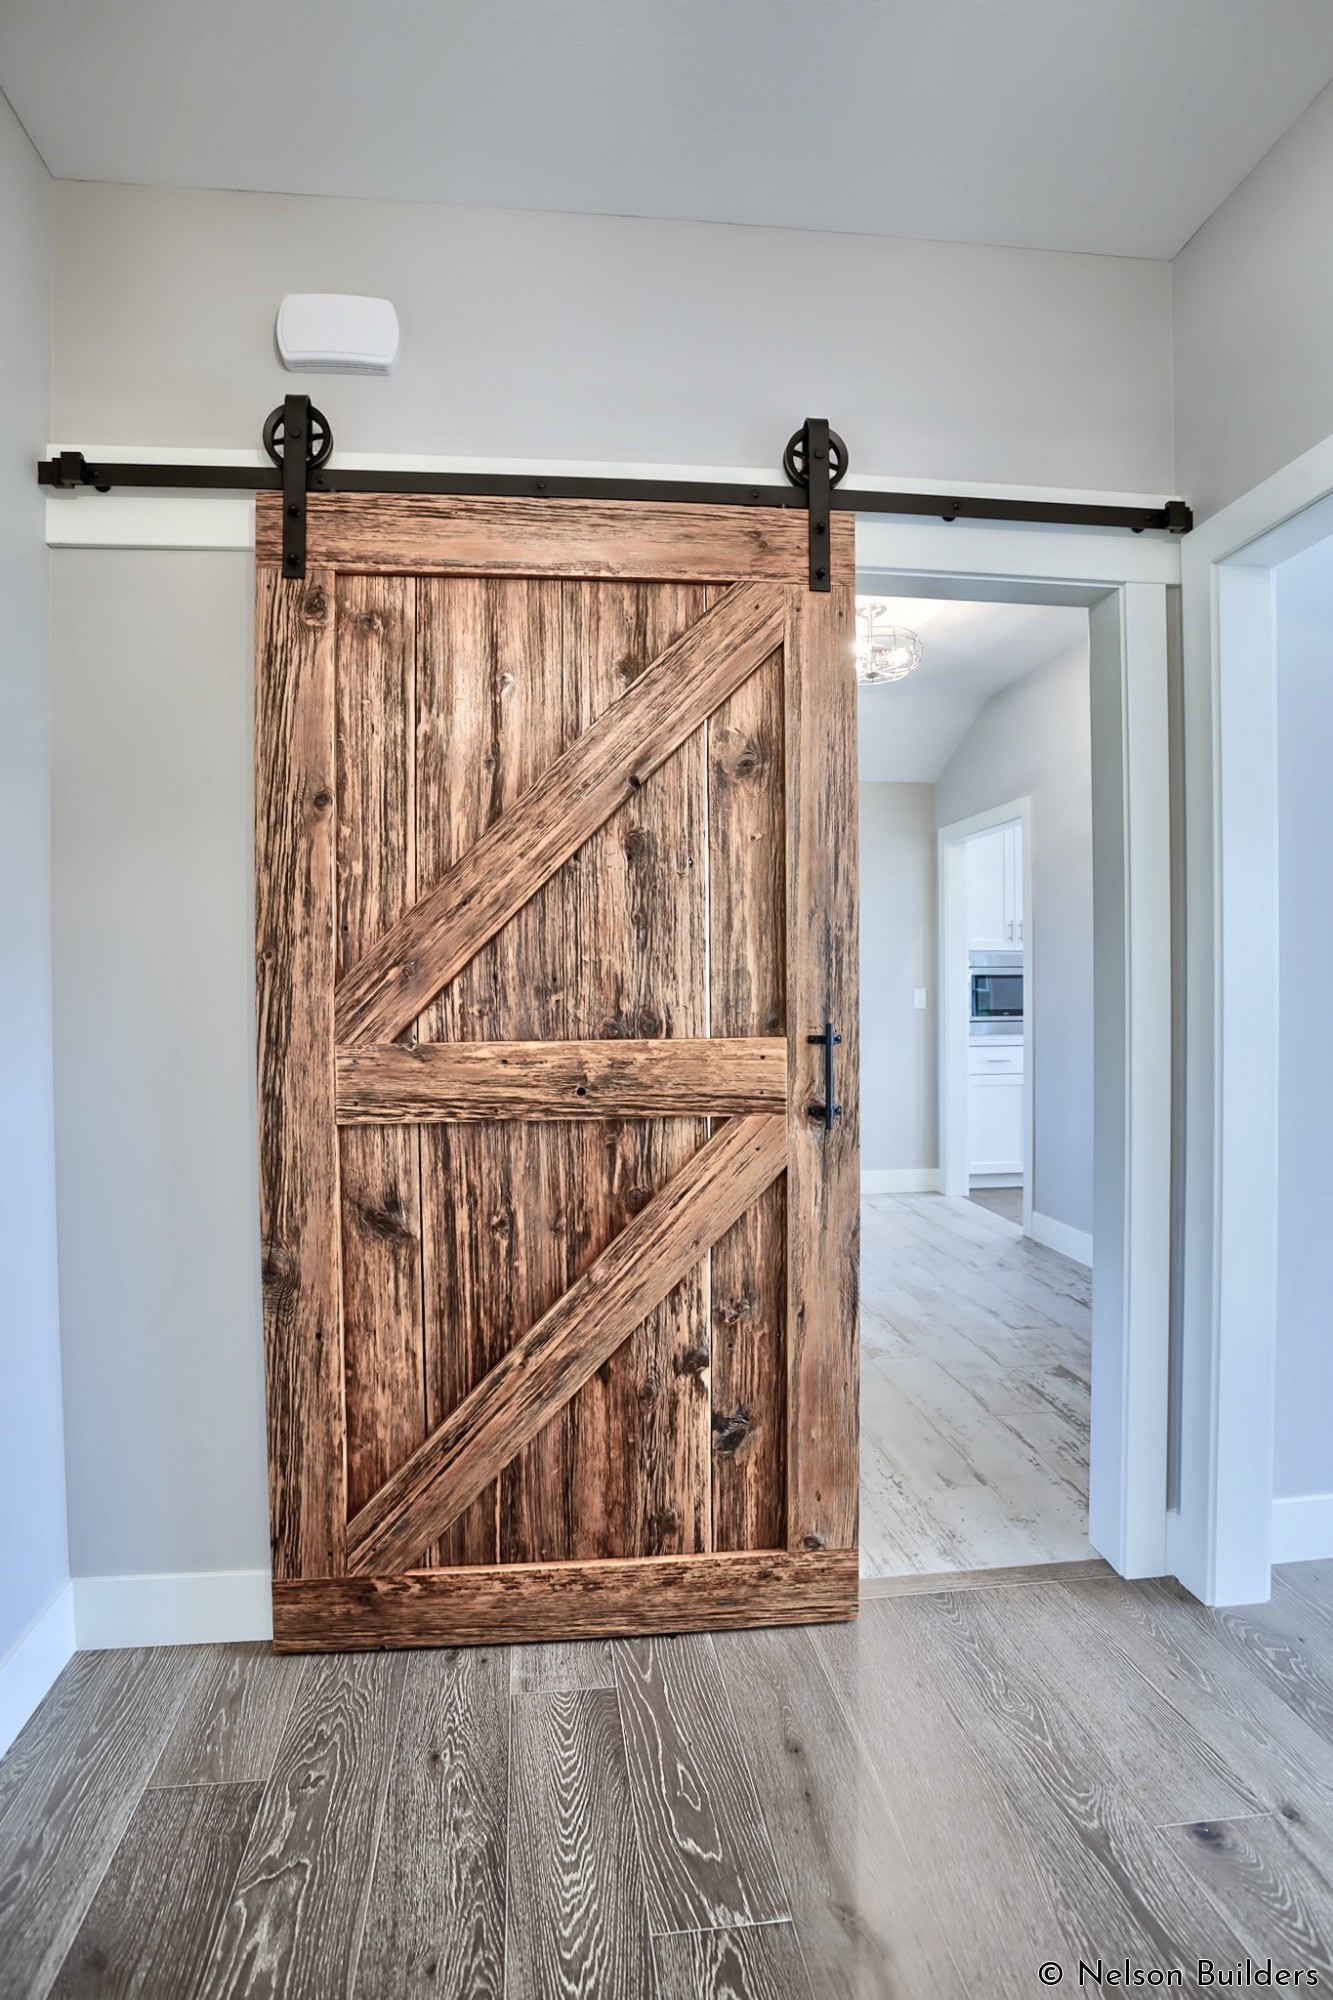 The laundry room is tucked away behind this stunning barn door, finished by the owners.